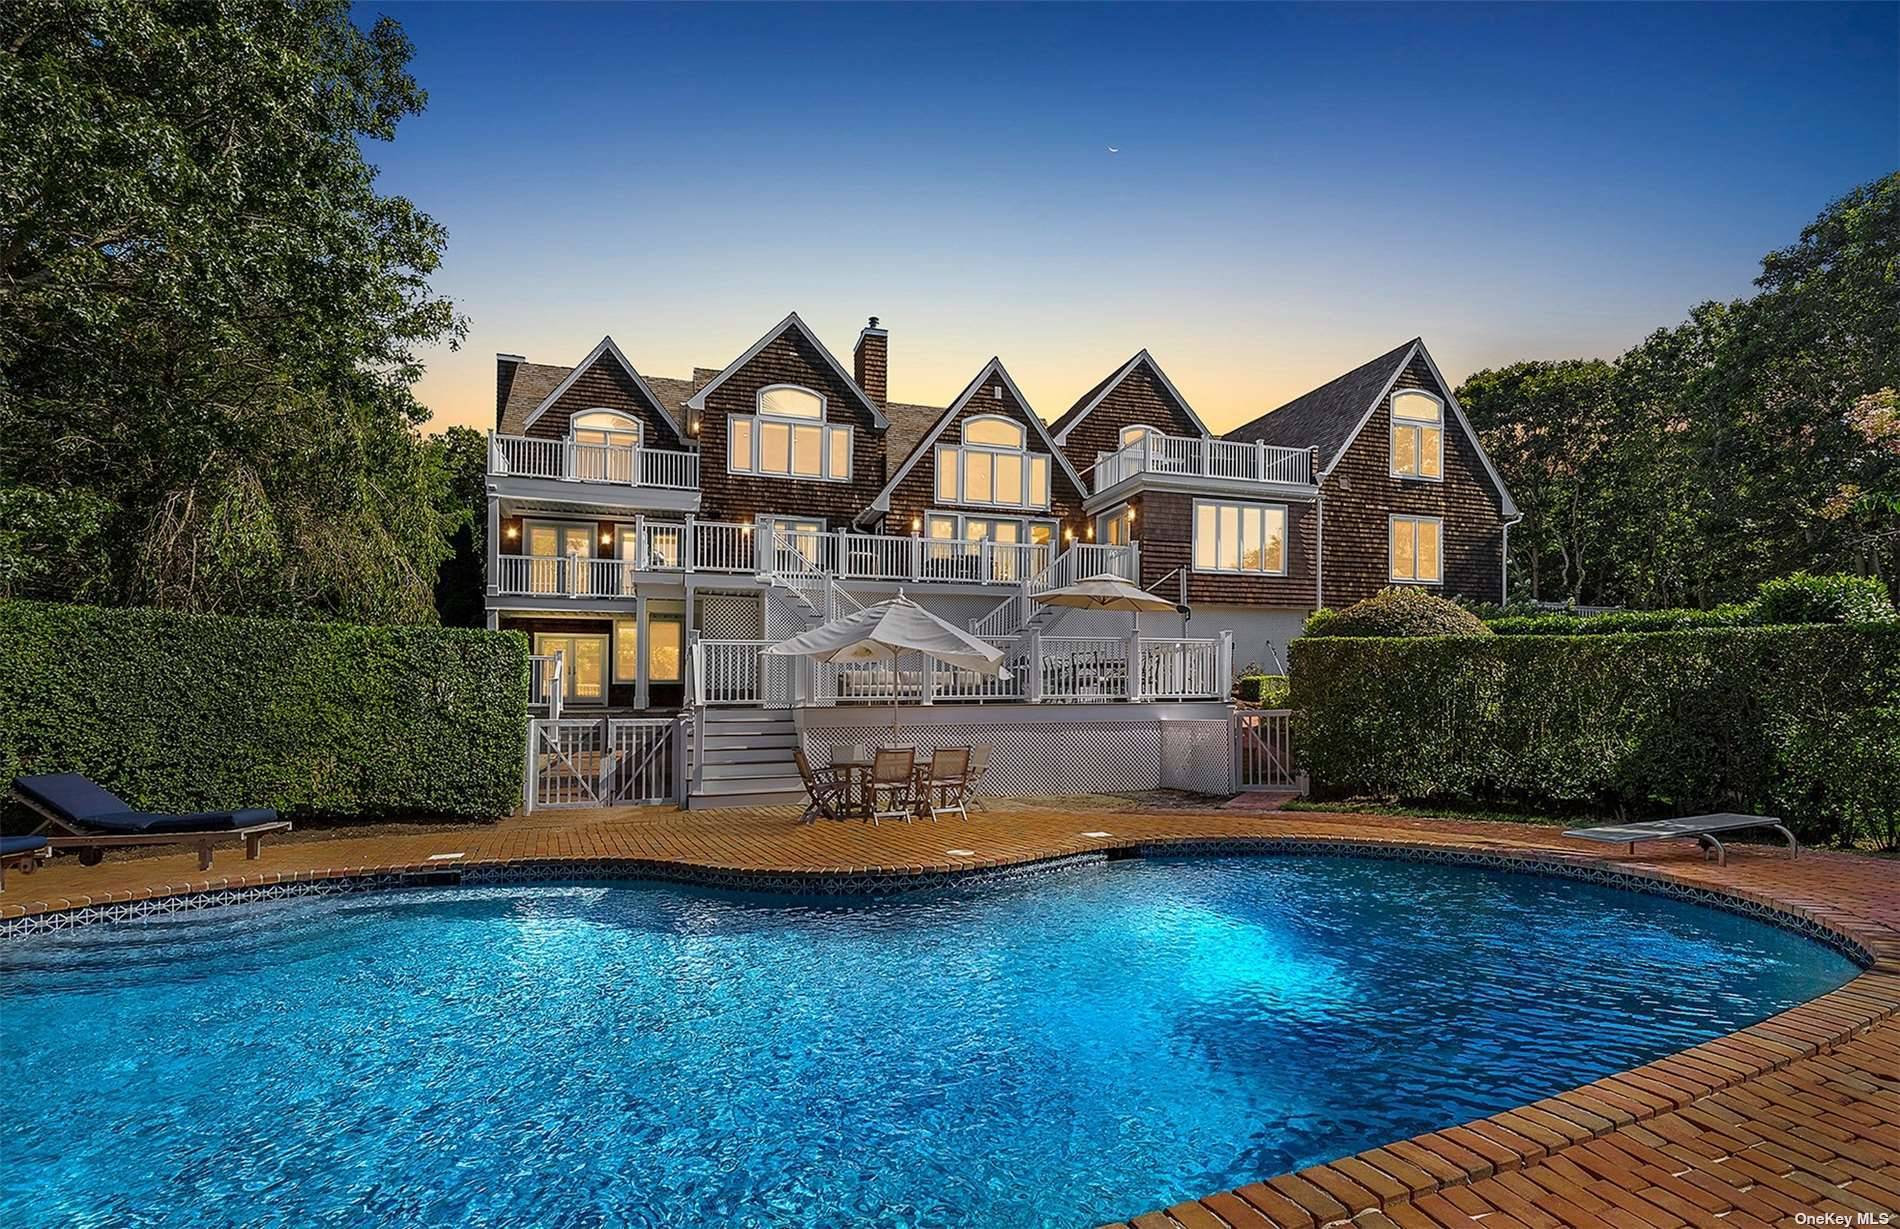 Welcome home to this gated estate with jaw dropping hilltop and water views sited on just over 3 acres in the prestigious Fourteen Hills neighborhood of Sag Harbor.